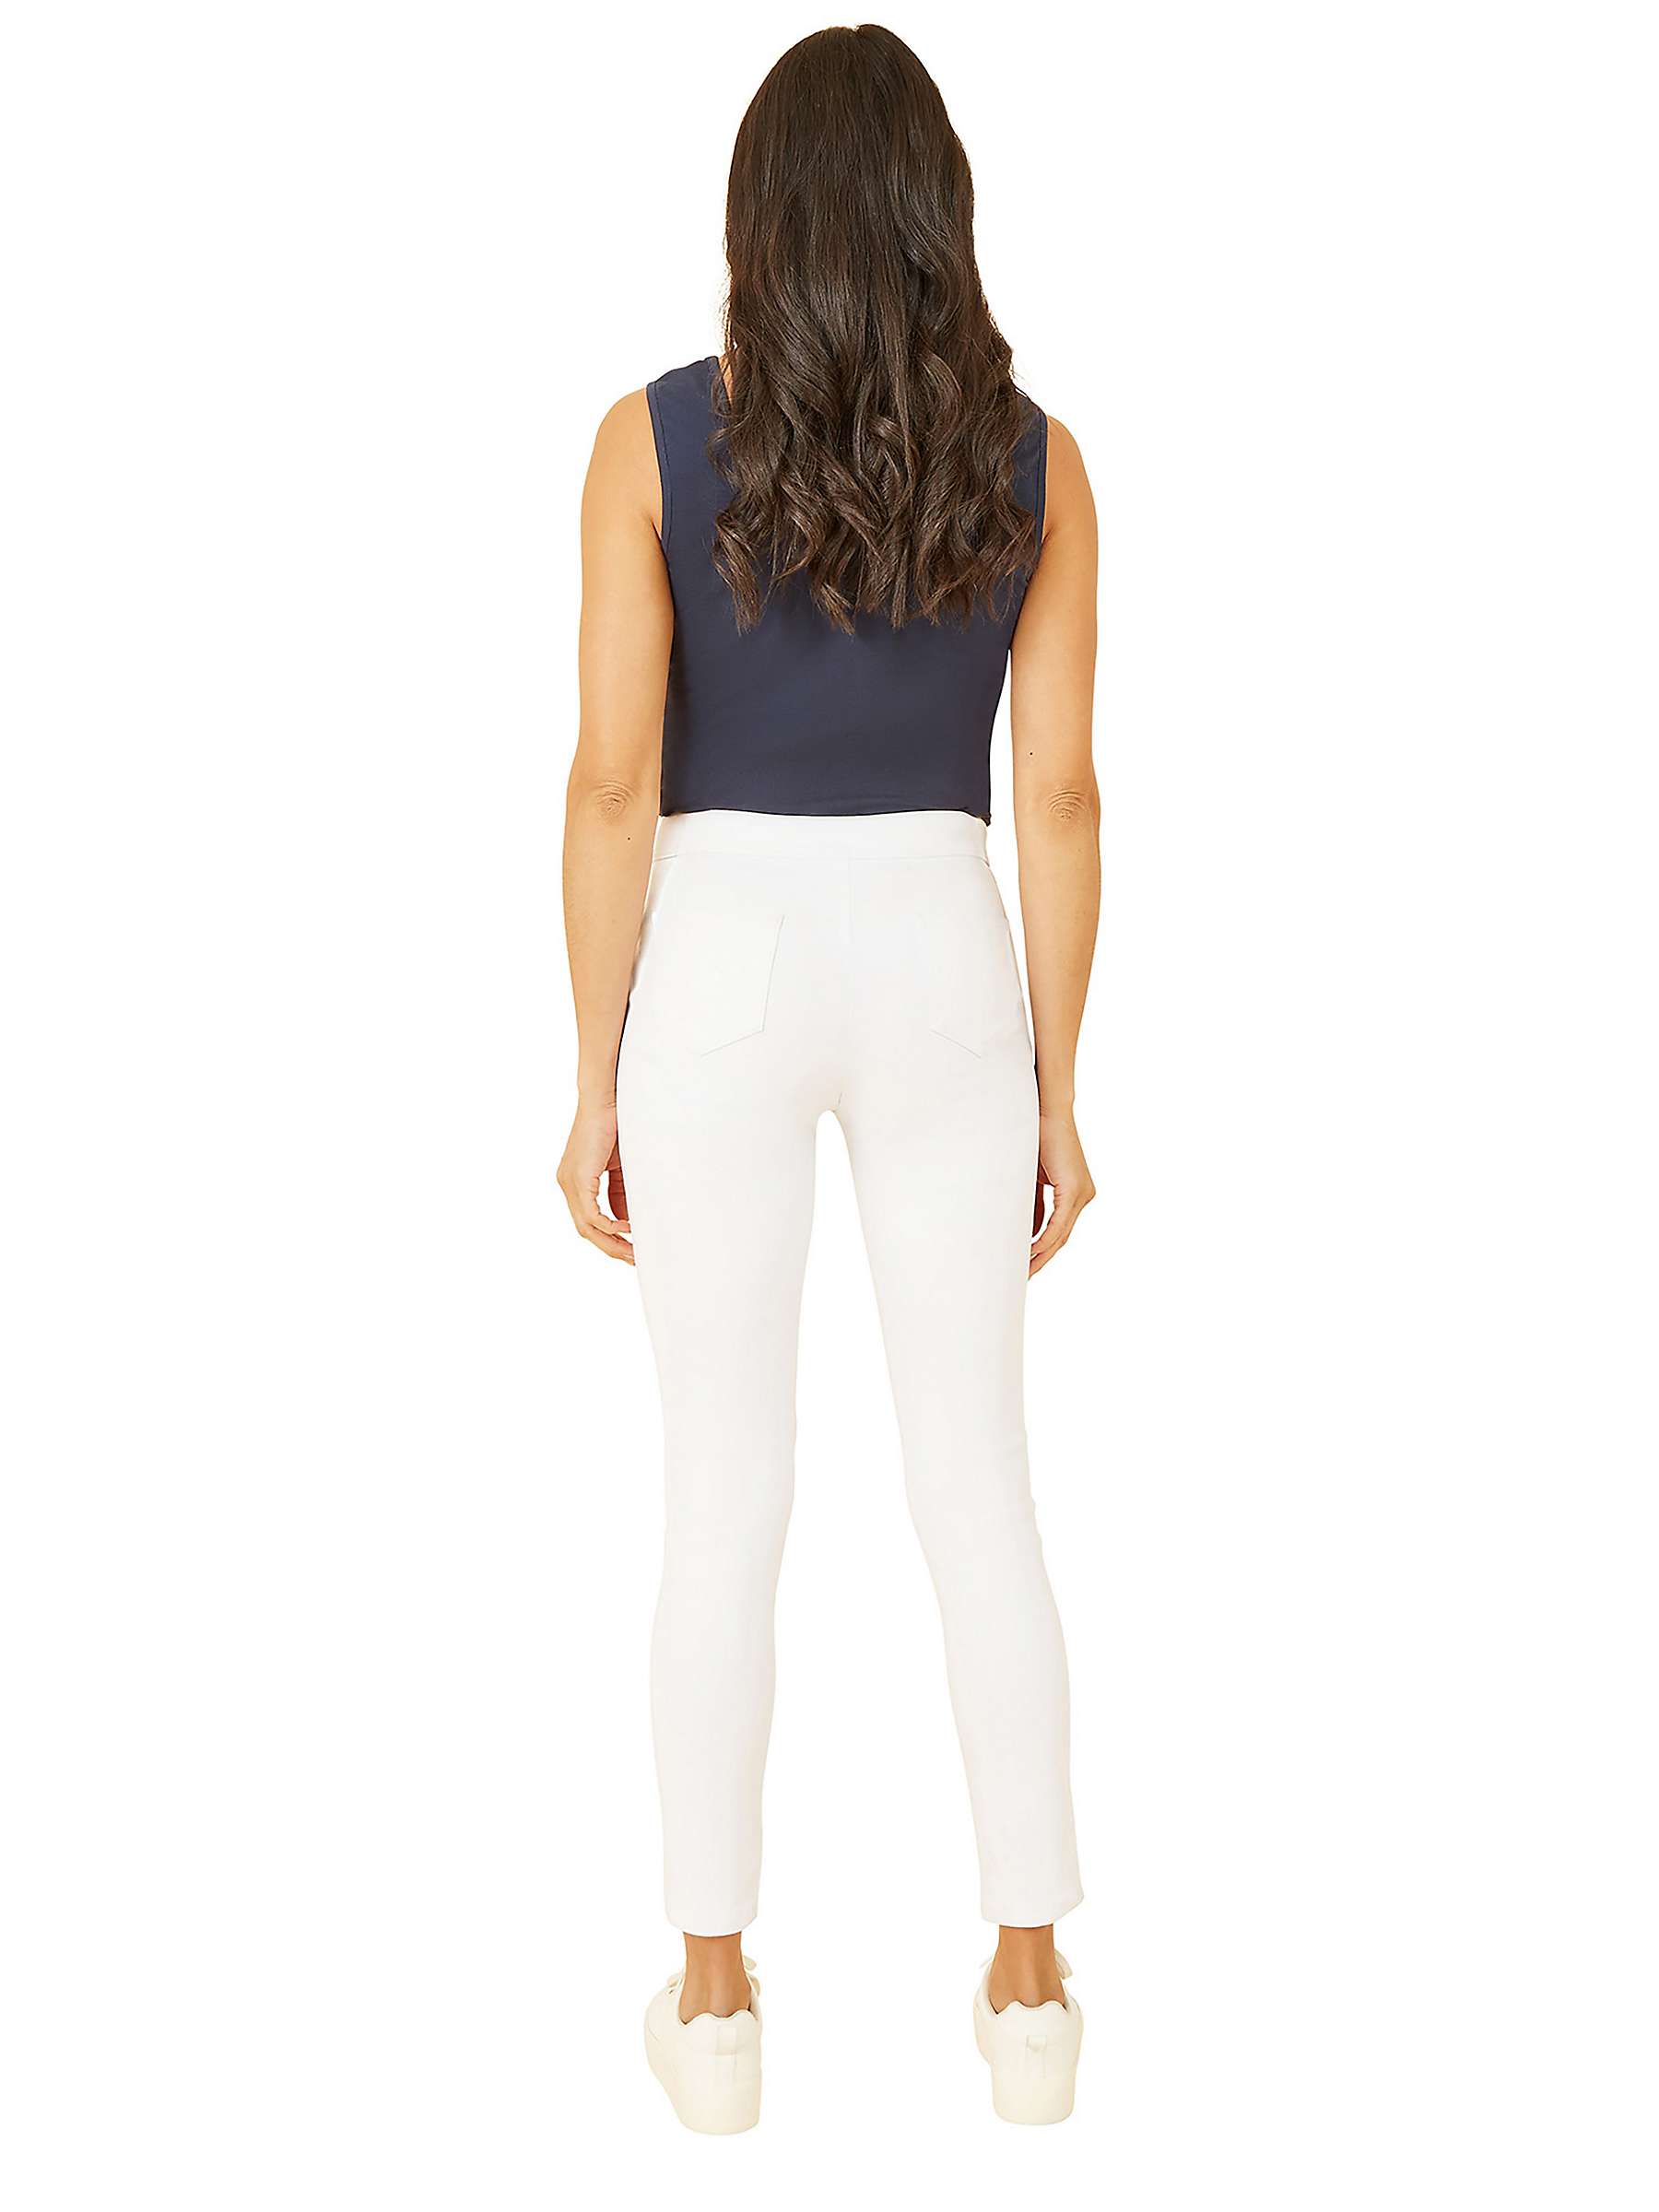 Buy Yumi Plain Stretch Jeggings, White Online at johnlewis.com